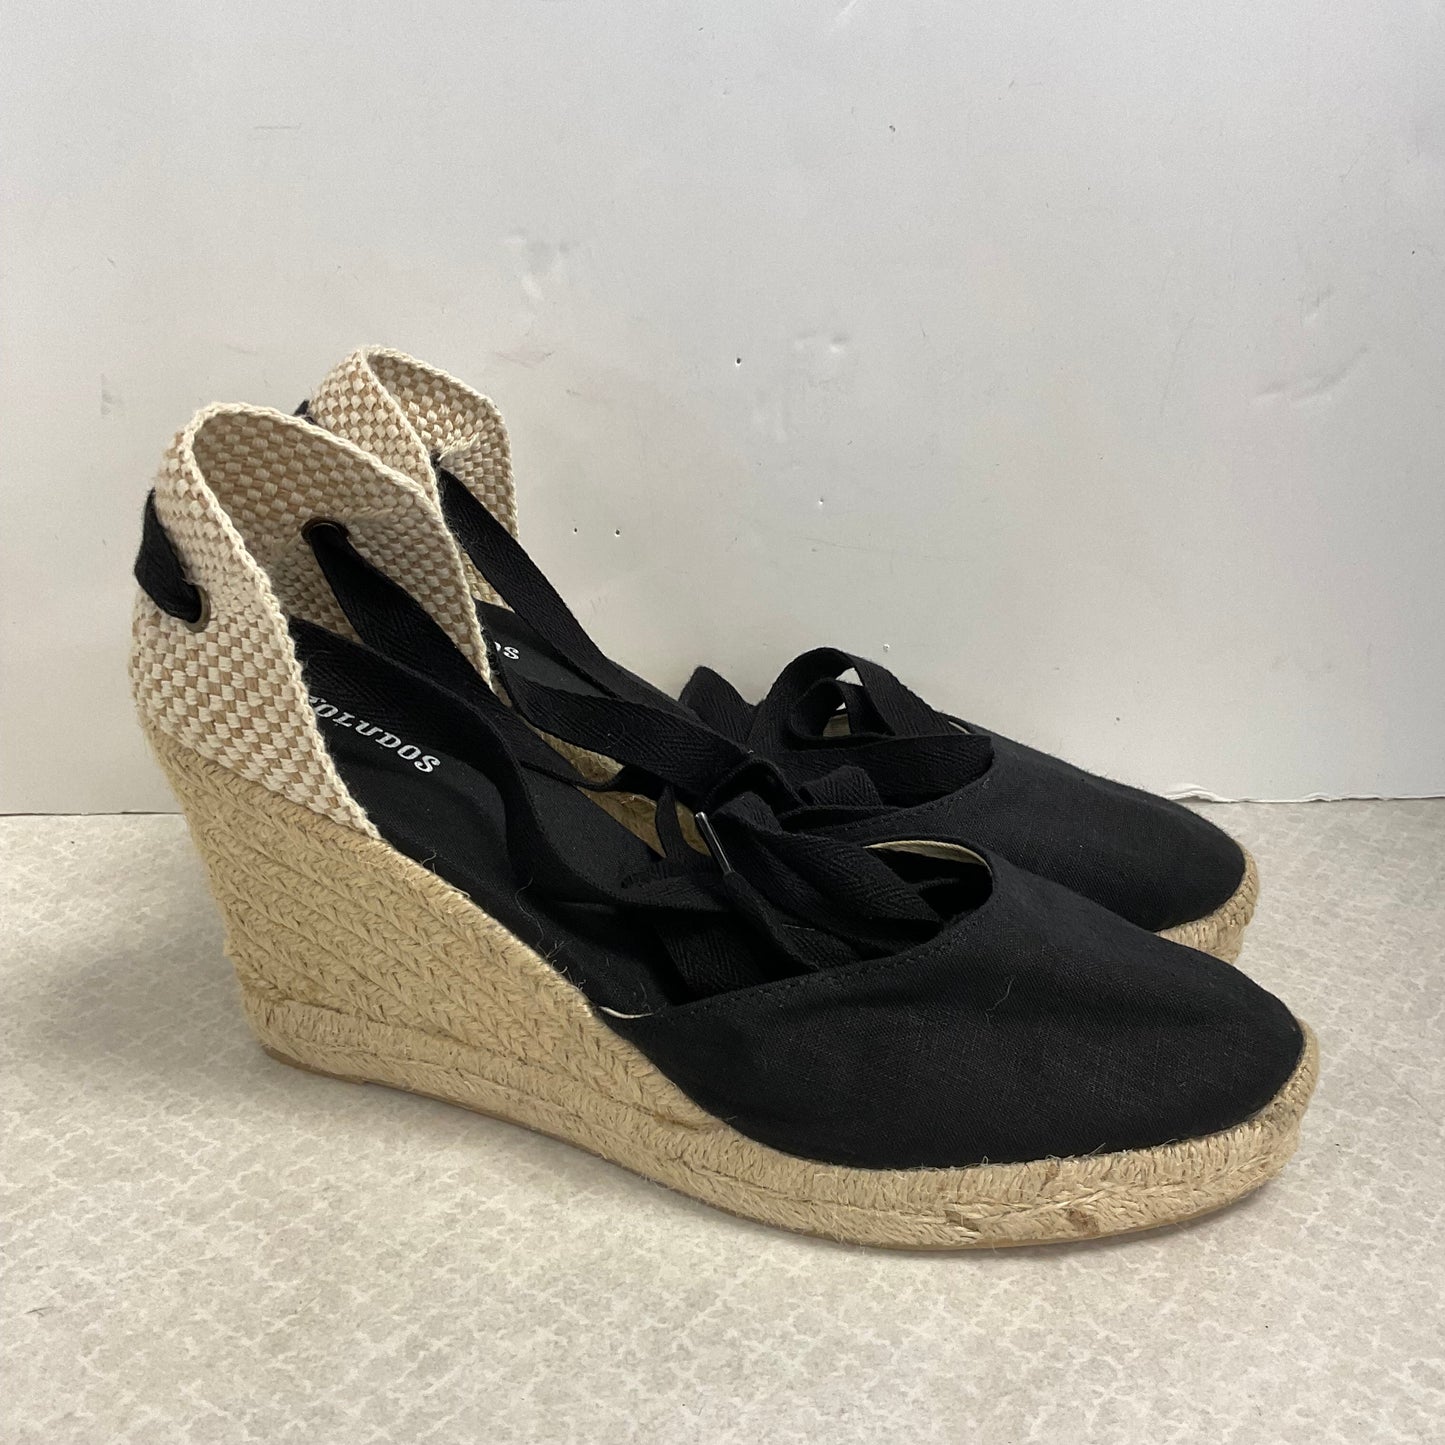 Sandals Heels Wedge By Soludos  Size: 9.5